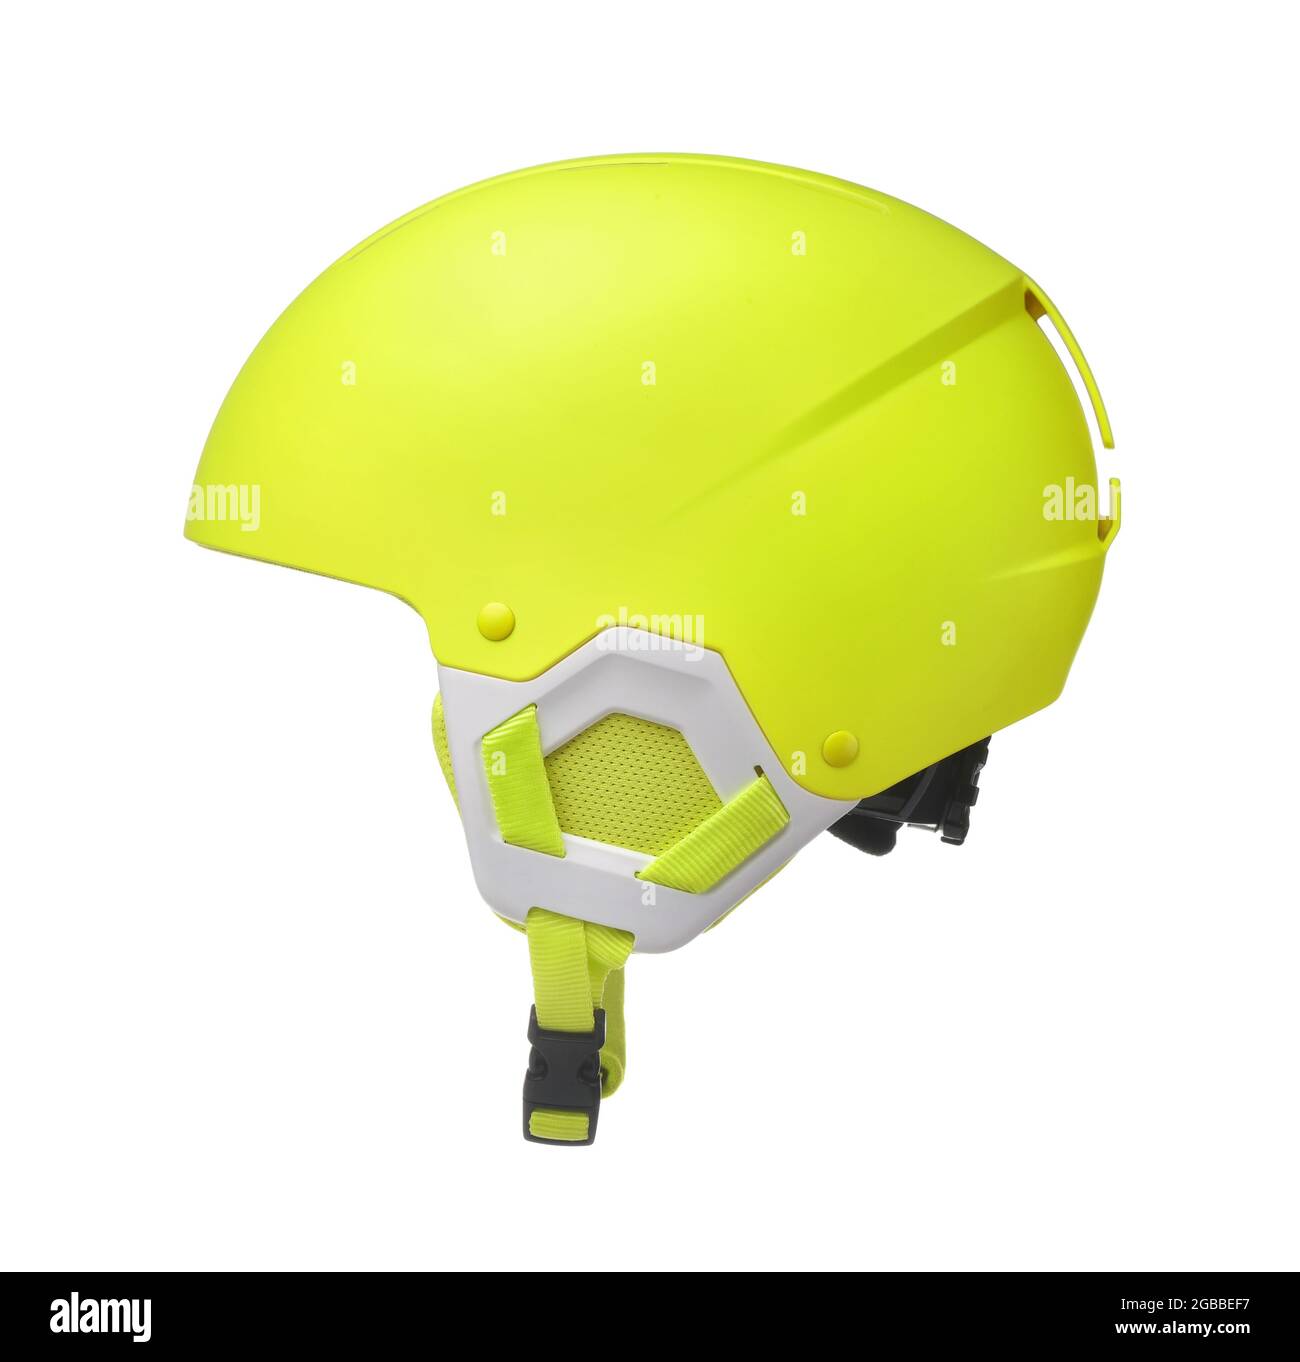 Side view of yellow snowboard safety helmet isolated on white Stock Photo